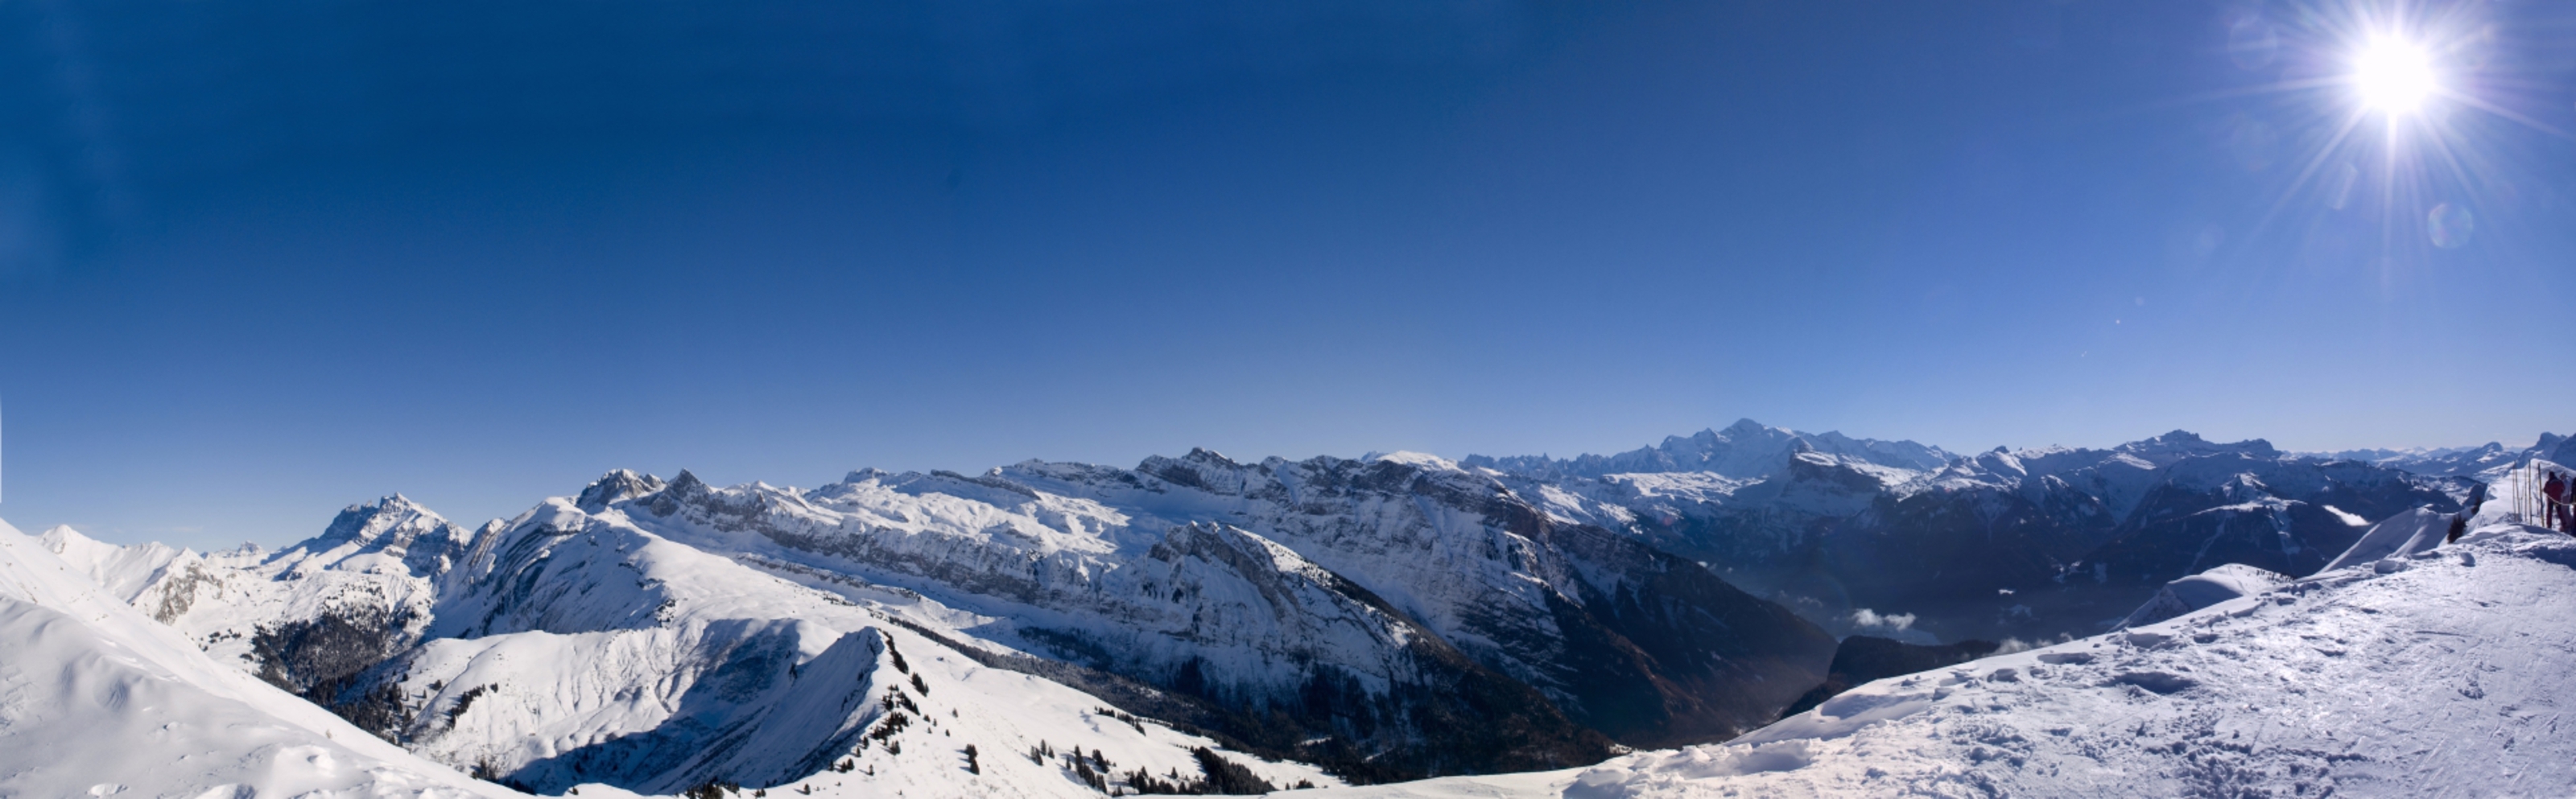 The snowy slopes of the French Alps beg to be explored on skis.